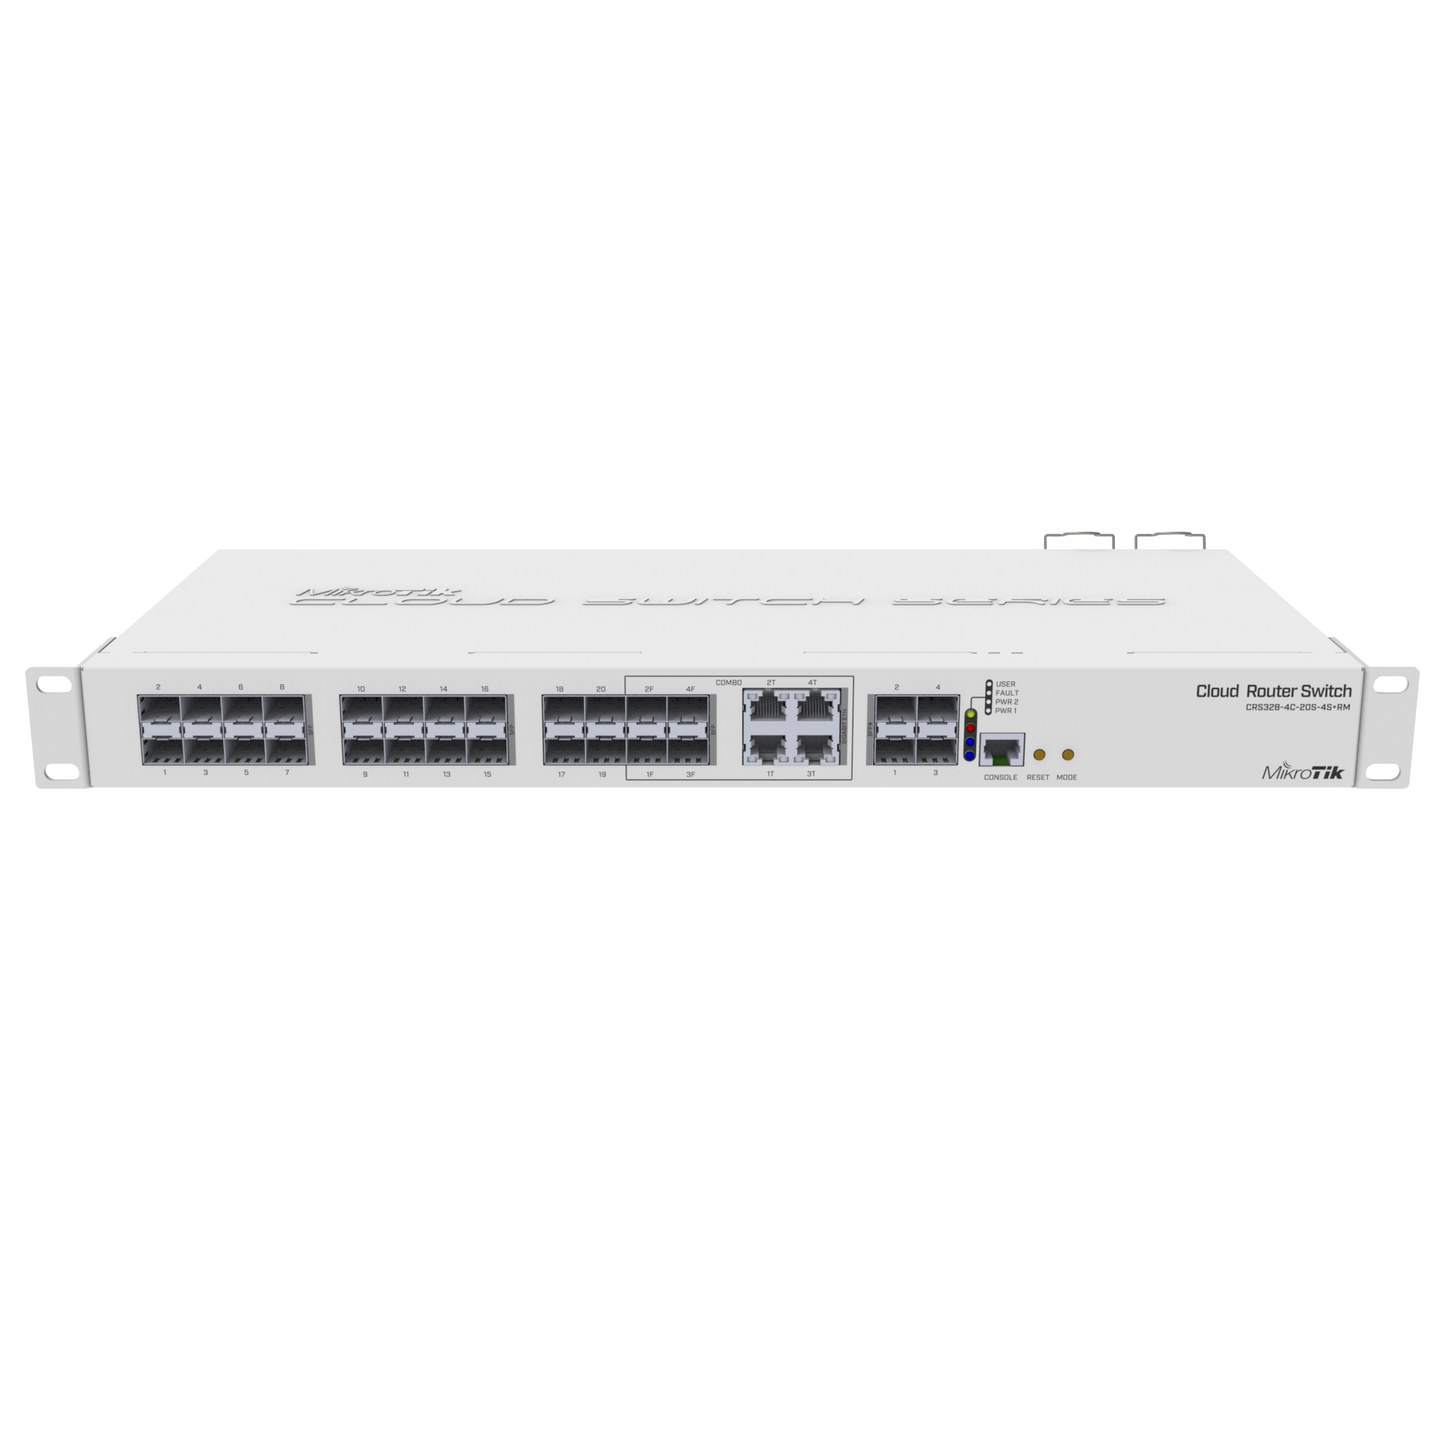 (CRS328-4C-20S-4S+RM) Cloud Router Switch Administrable L3, 4 puertos combo TP/SFP, 20 Puertos SFP, 4 Puertos SFP+